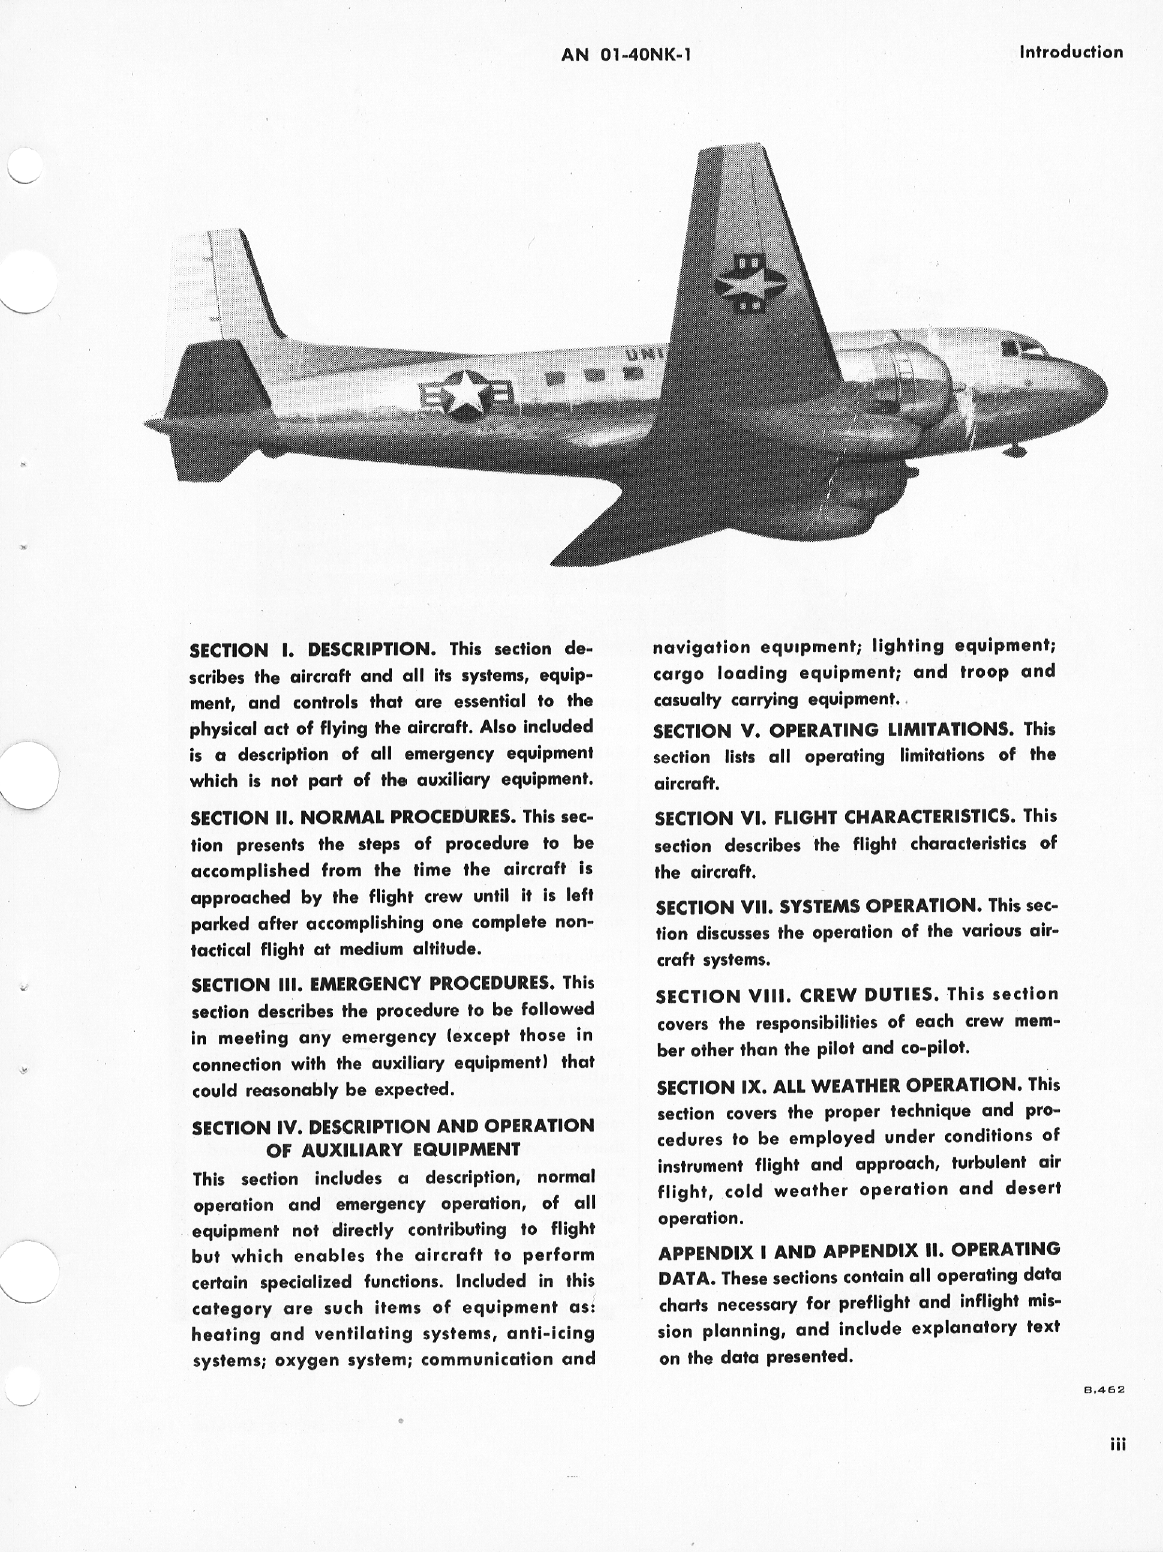 Sample page 23 from AirCorps Library document: Flight Handbook for Navy Model R4D-8 and R4D-8Z Aircraft